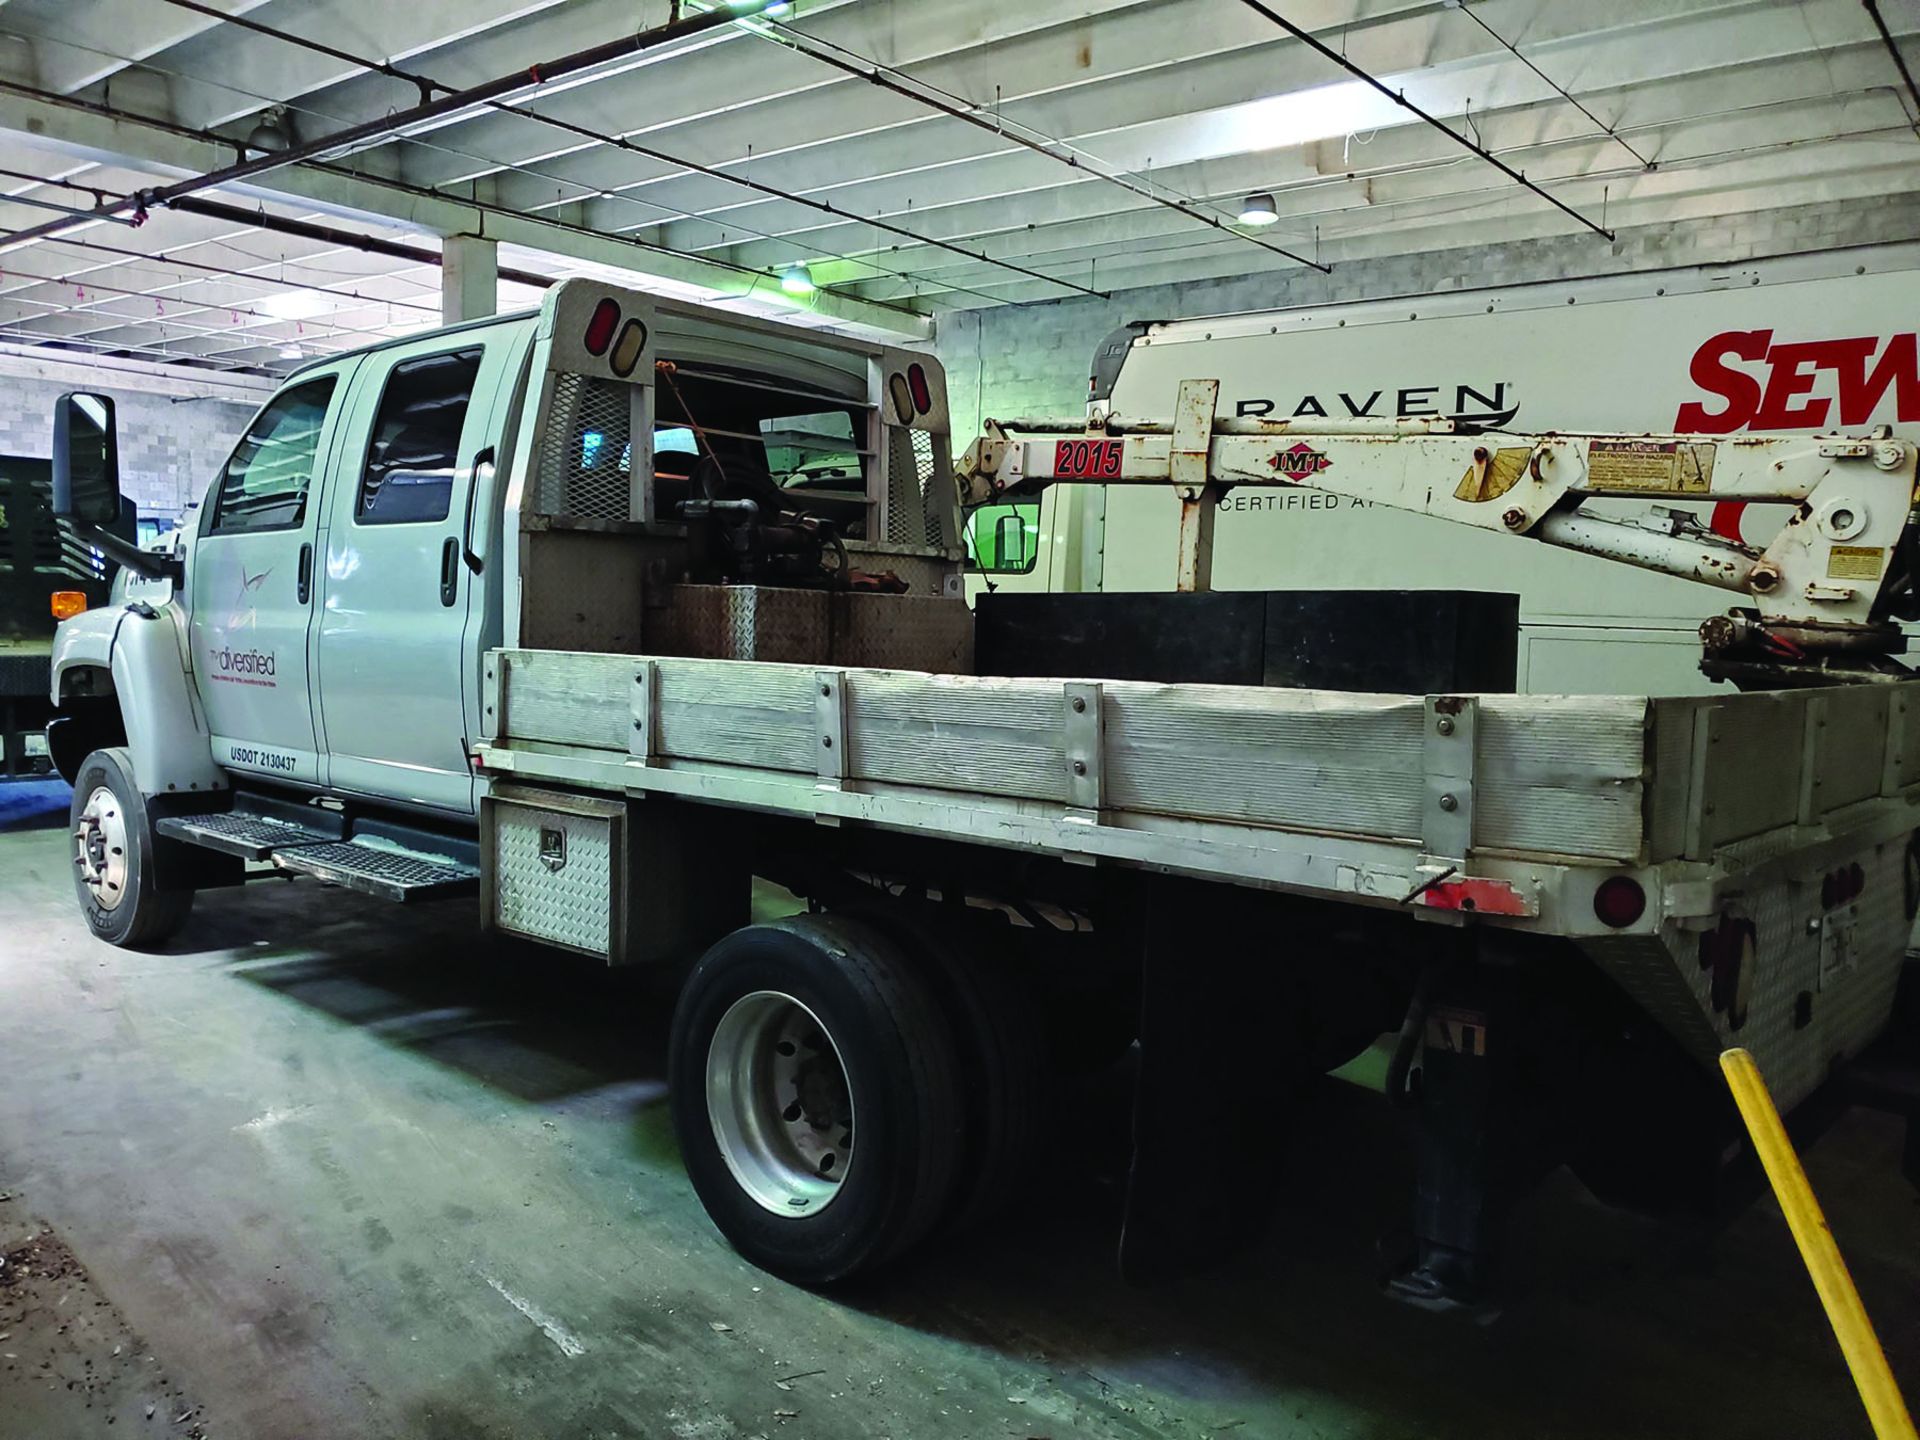 2006 CHEVROLET C4500 4X4 CREW CAB FLAT/STAKE BED TRUCK W/IMT 2015 TELESCOPING BOOM, 2.5 TON HOOK,